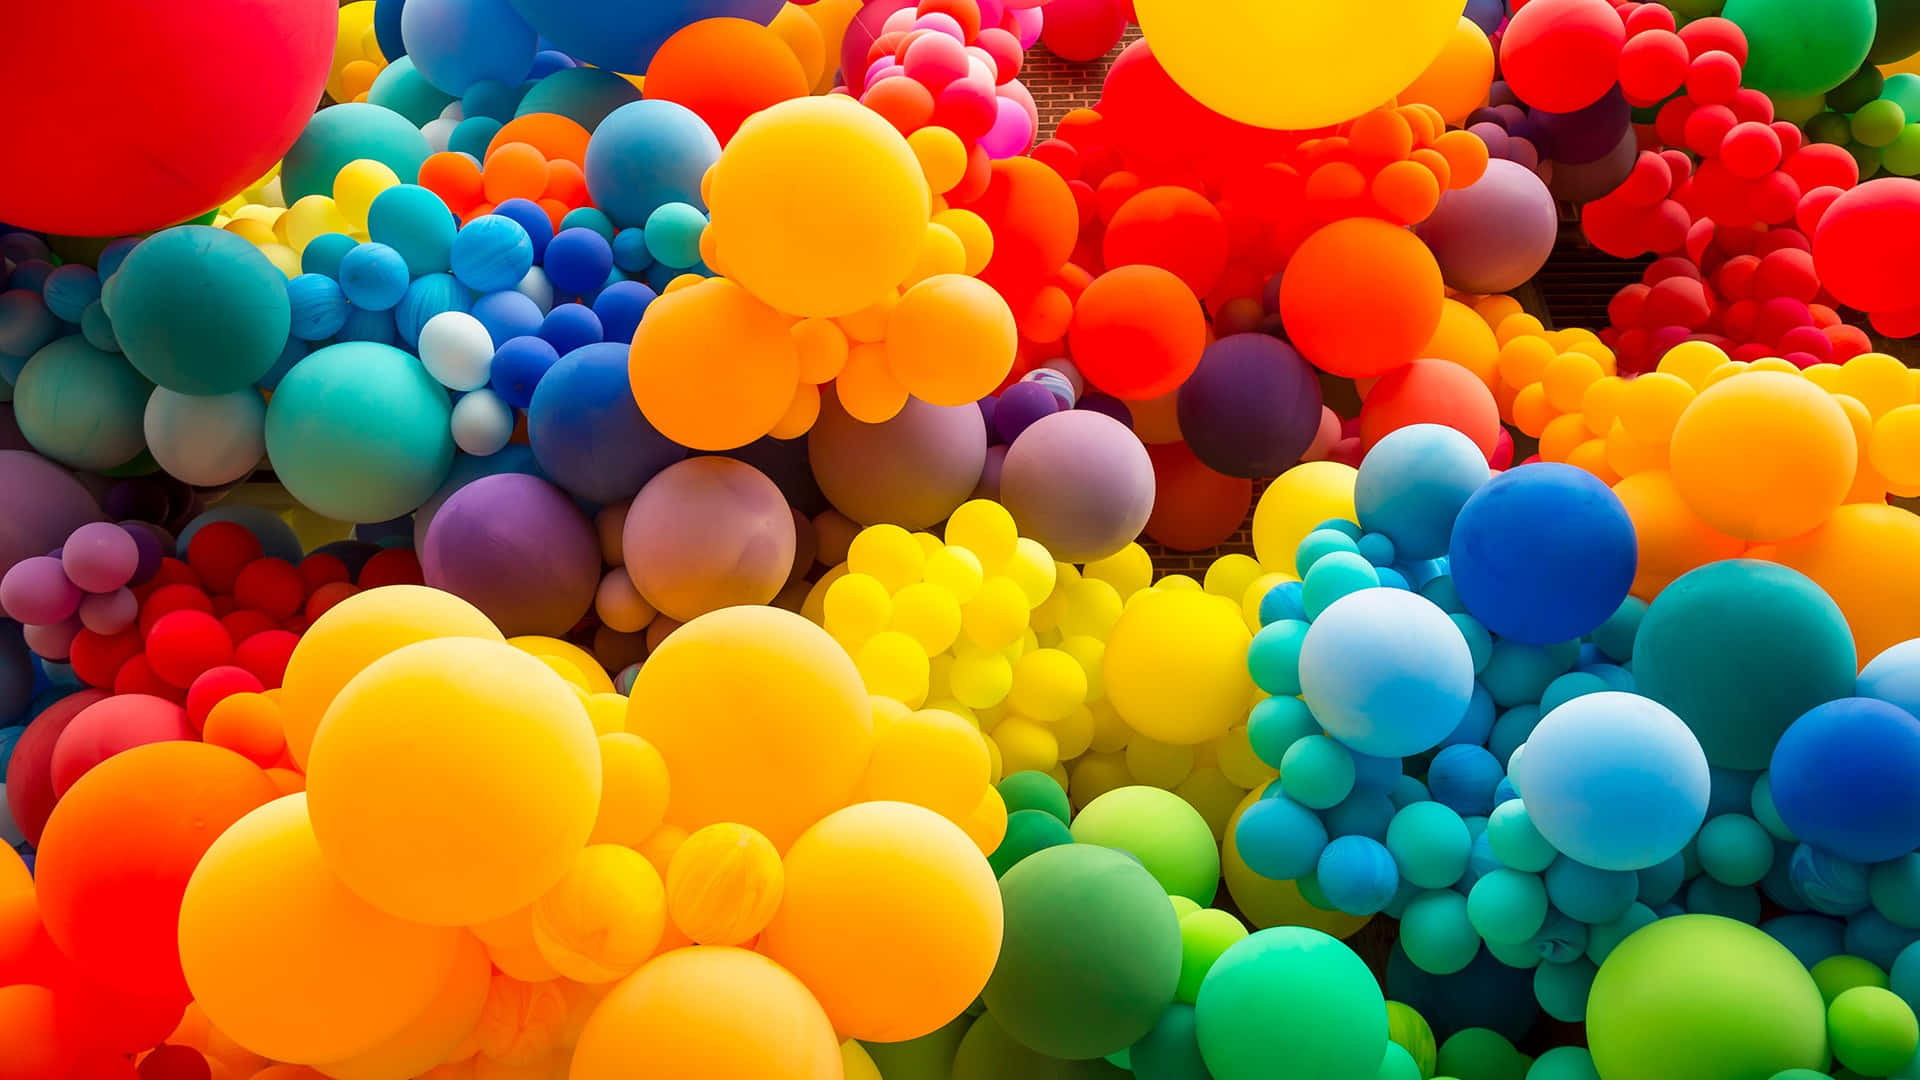 Colorful balloons freed from their strings and floating up towards the beautiful blue sky